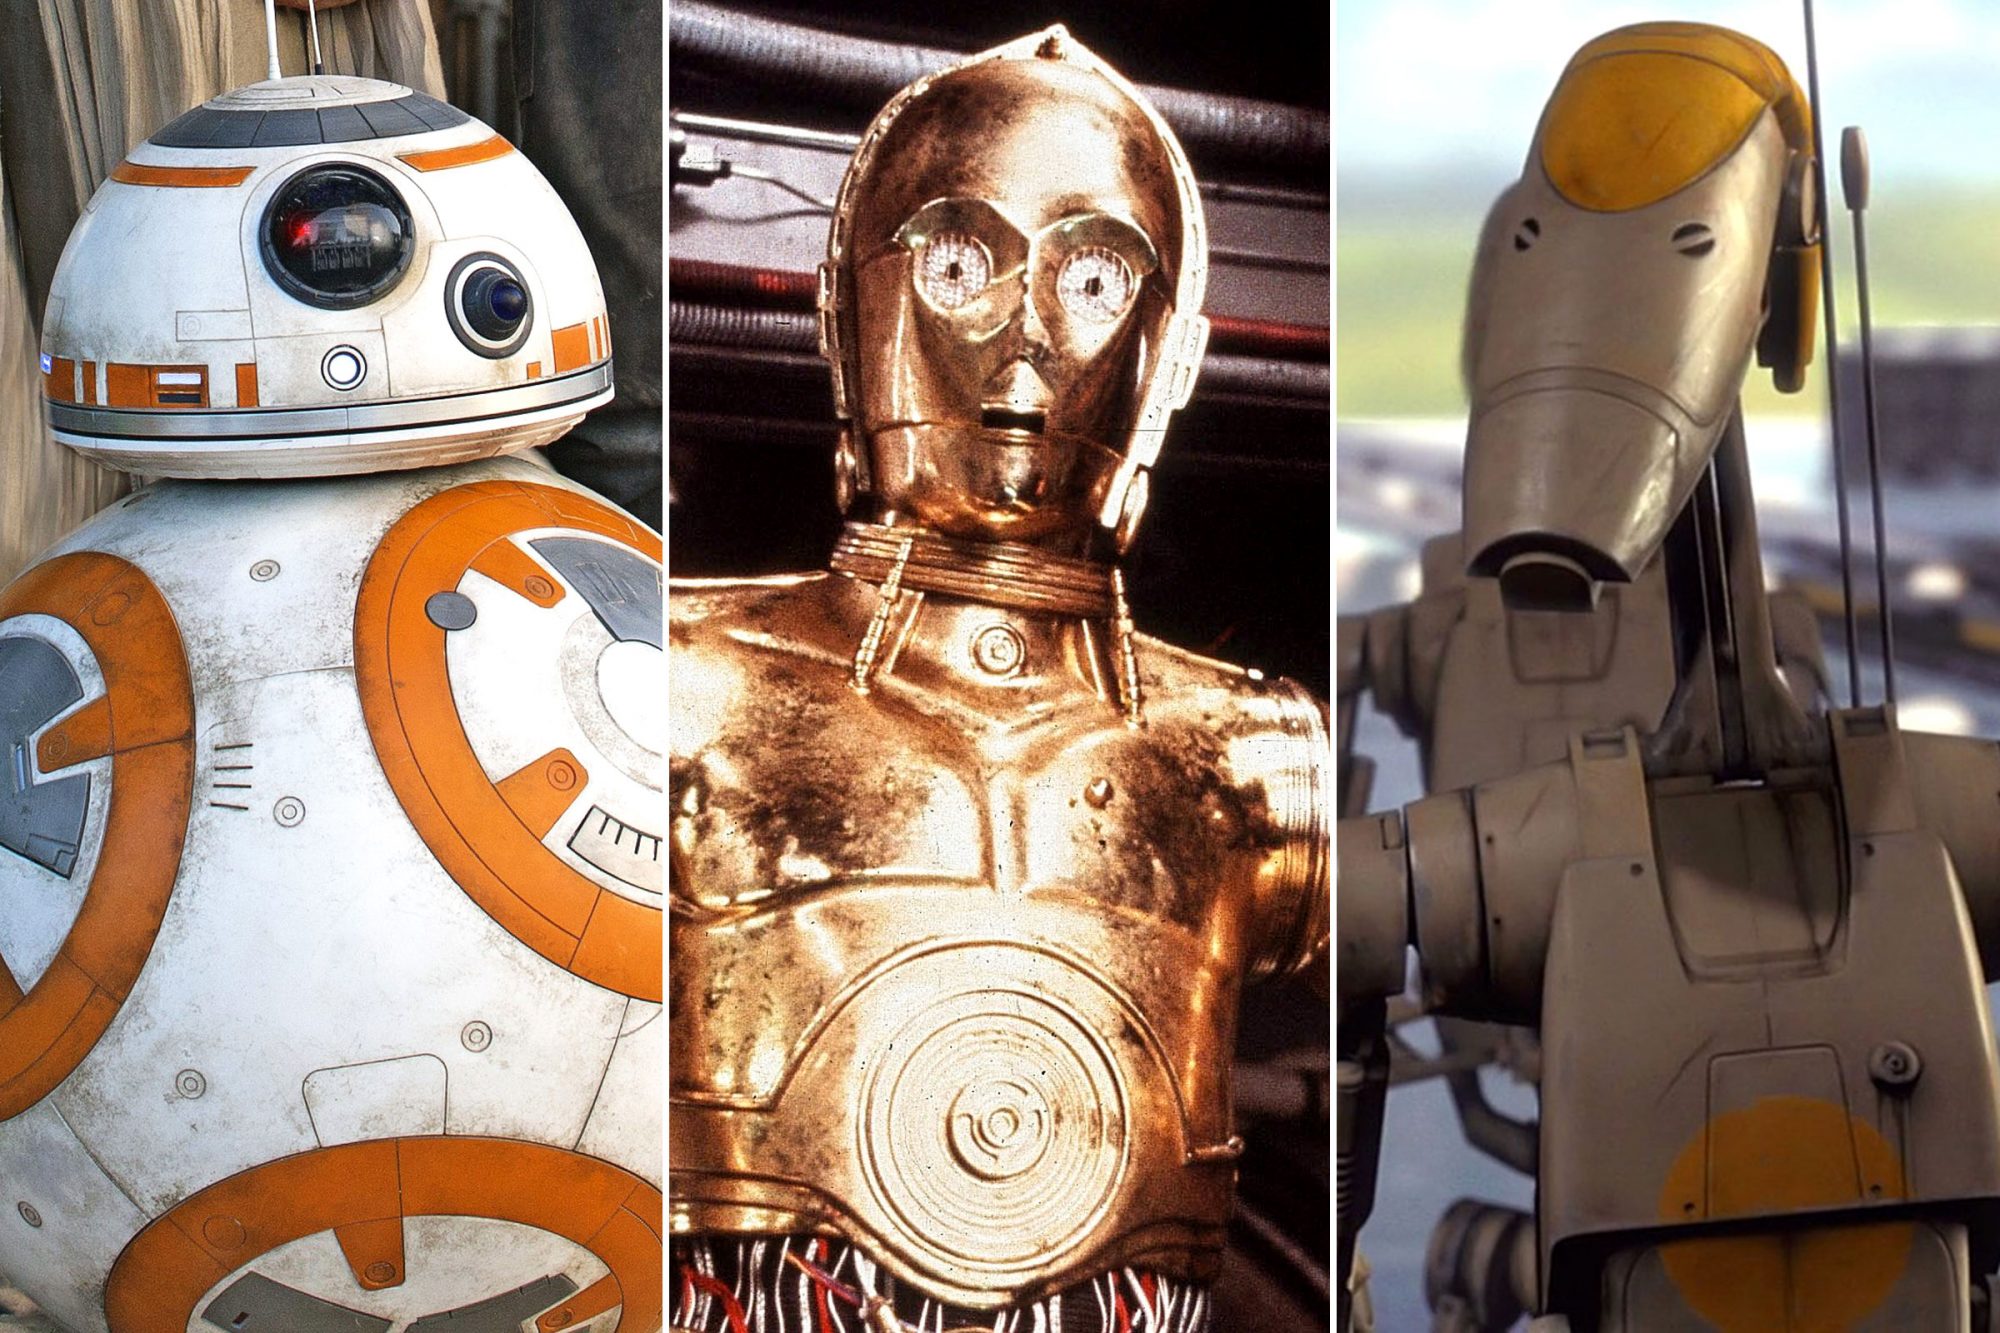 Who are the Droids in the Star Wars series?